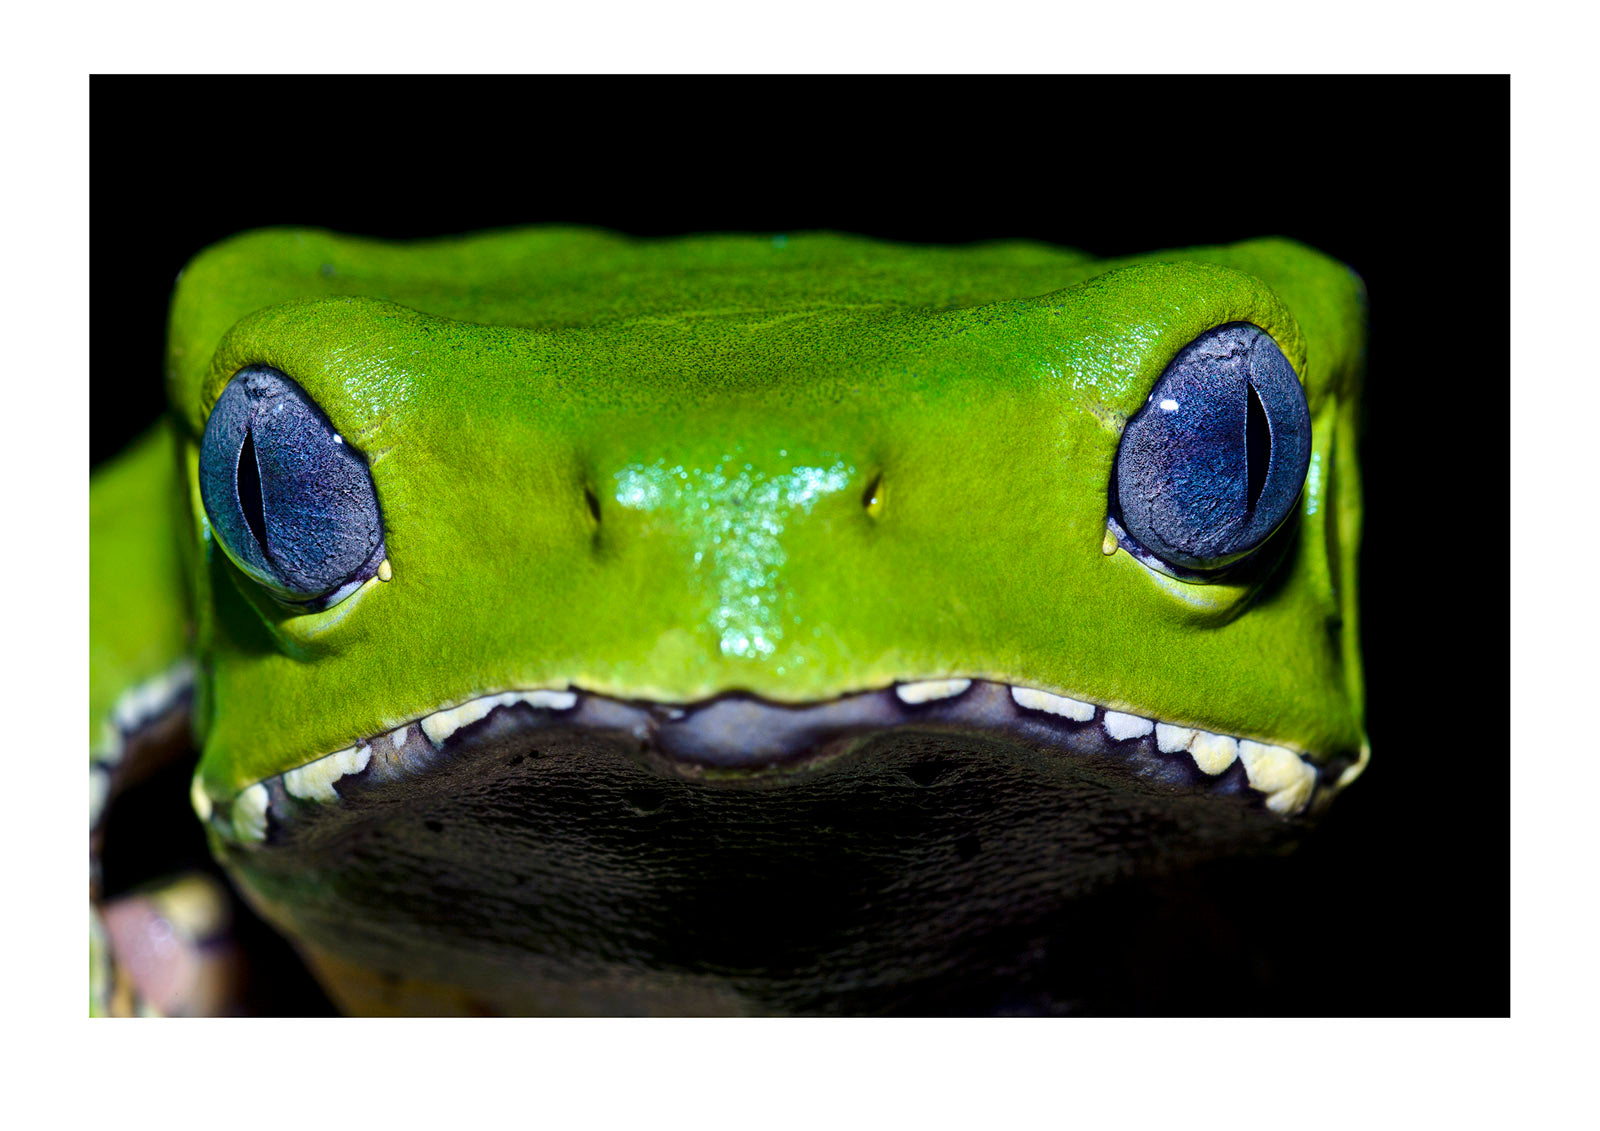 Veins in the purple-blue eyes of a bright green Giant Leaf Frog hunting in the rainforest at night. Amazon River, Amazon Basin, Loreto Region, Maynas Province, Peru. Amazon River, Amazon Basin, Loreto Region, Maynas Province, Peru.